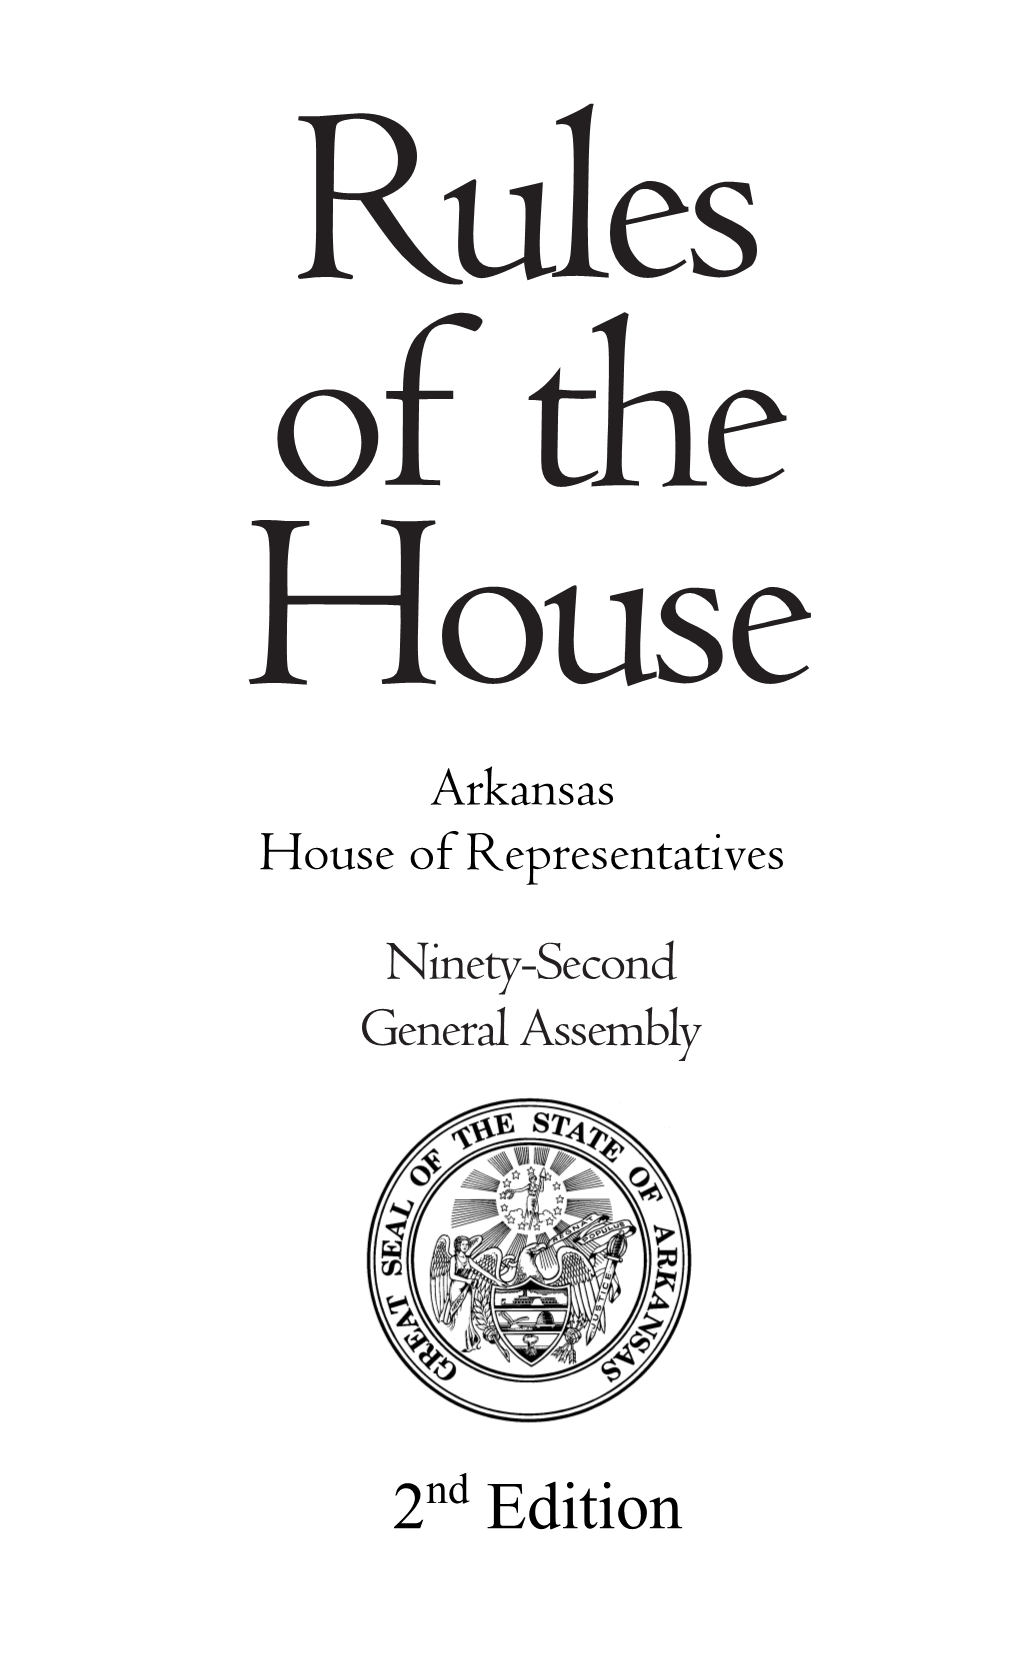 Joint Rules of the House of Representatives and the Senate